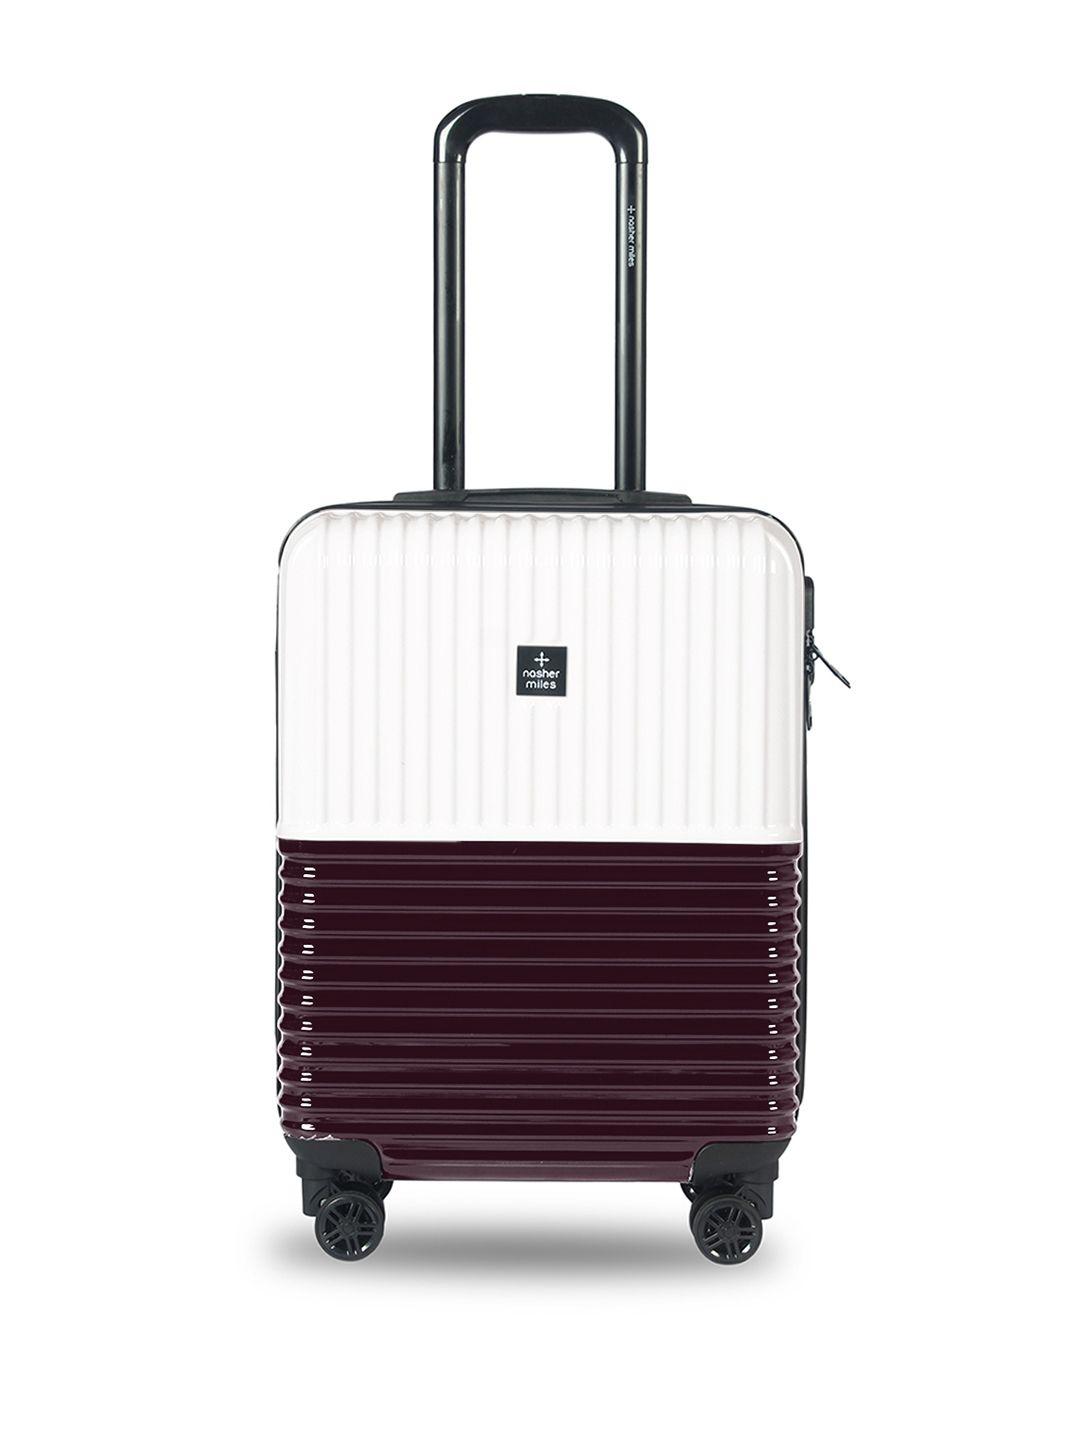 nasher miles istanbul colourblocked hard-sided cabin trolley bag- 55 cm